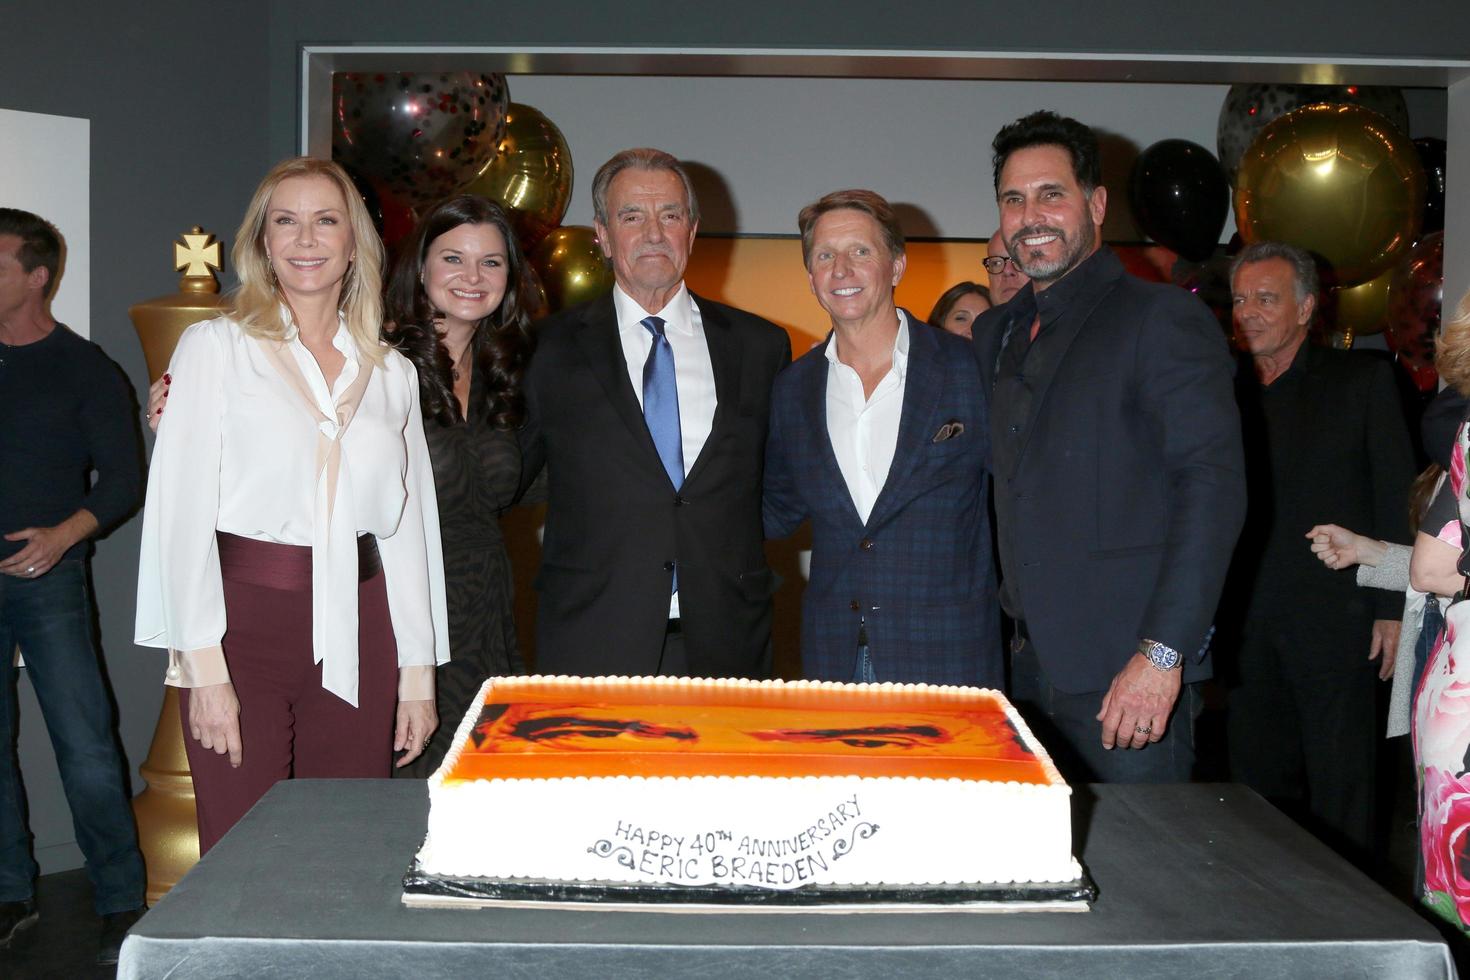 FEB 7 - Katherine Kelly Lang, Heather Tom, Eric Braeden, Bradley Bell, and Don Diamont at the Eric Braeden 40th Anniversary Celebration on February 7, 2020 in Los Angeles, CA photo